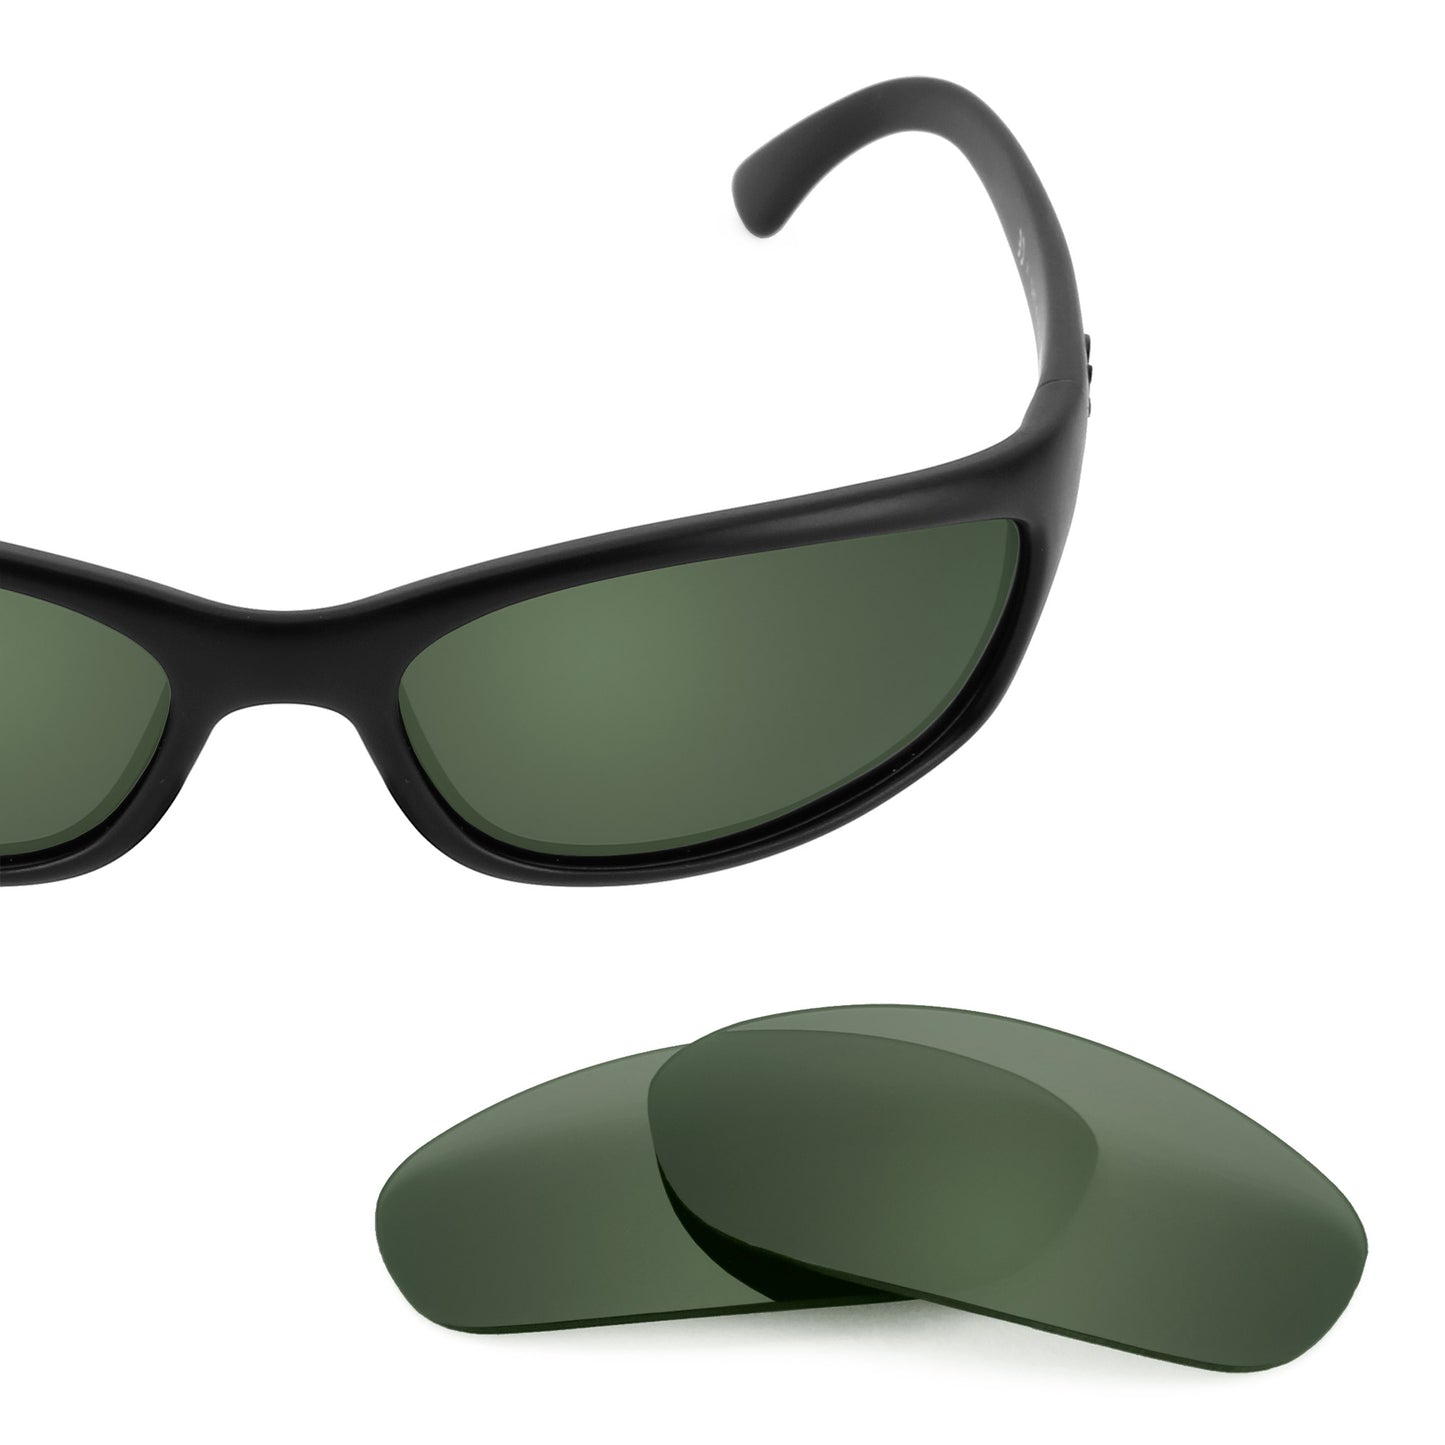 Revant replacement lenses for Ray-Ban RB4115 57mm Non-Polarized Gray Green